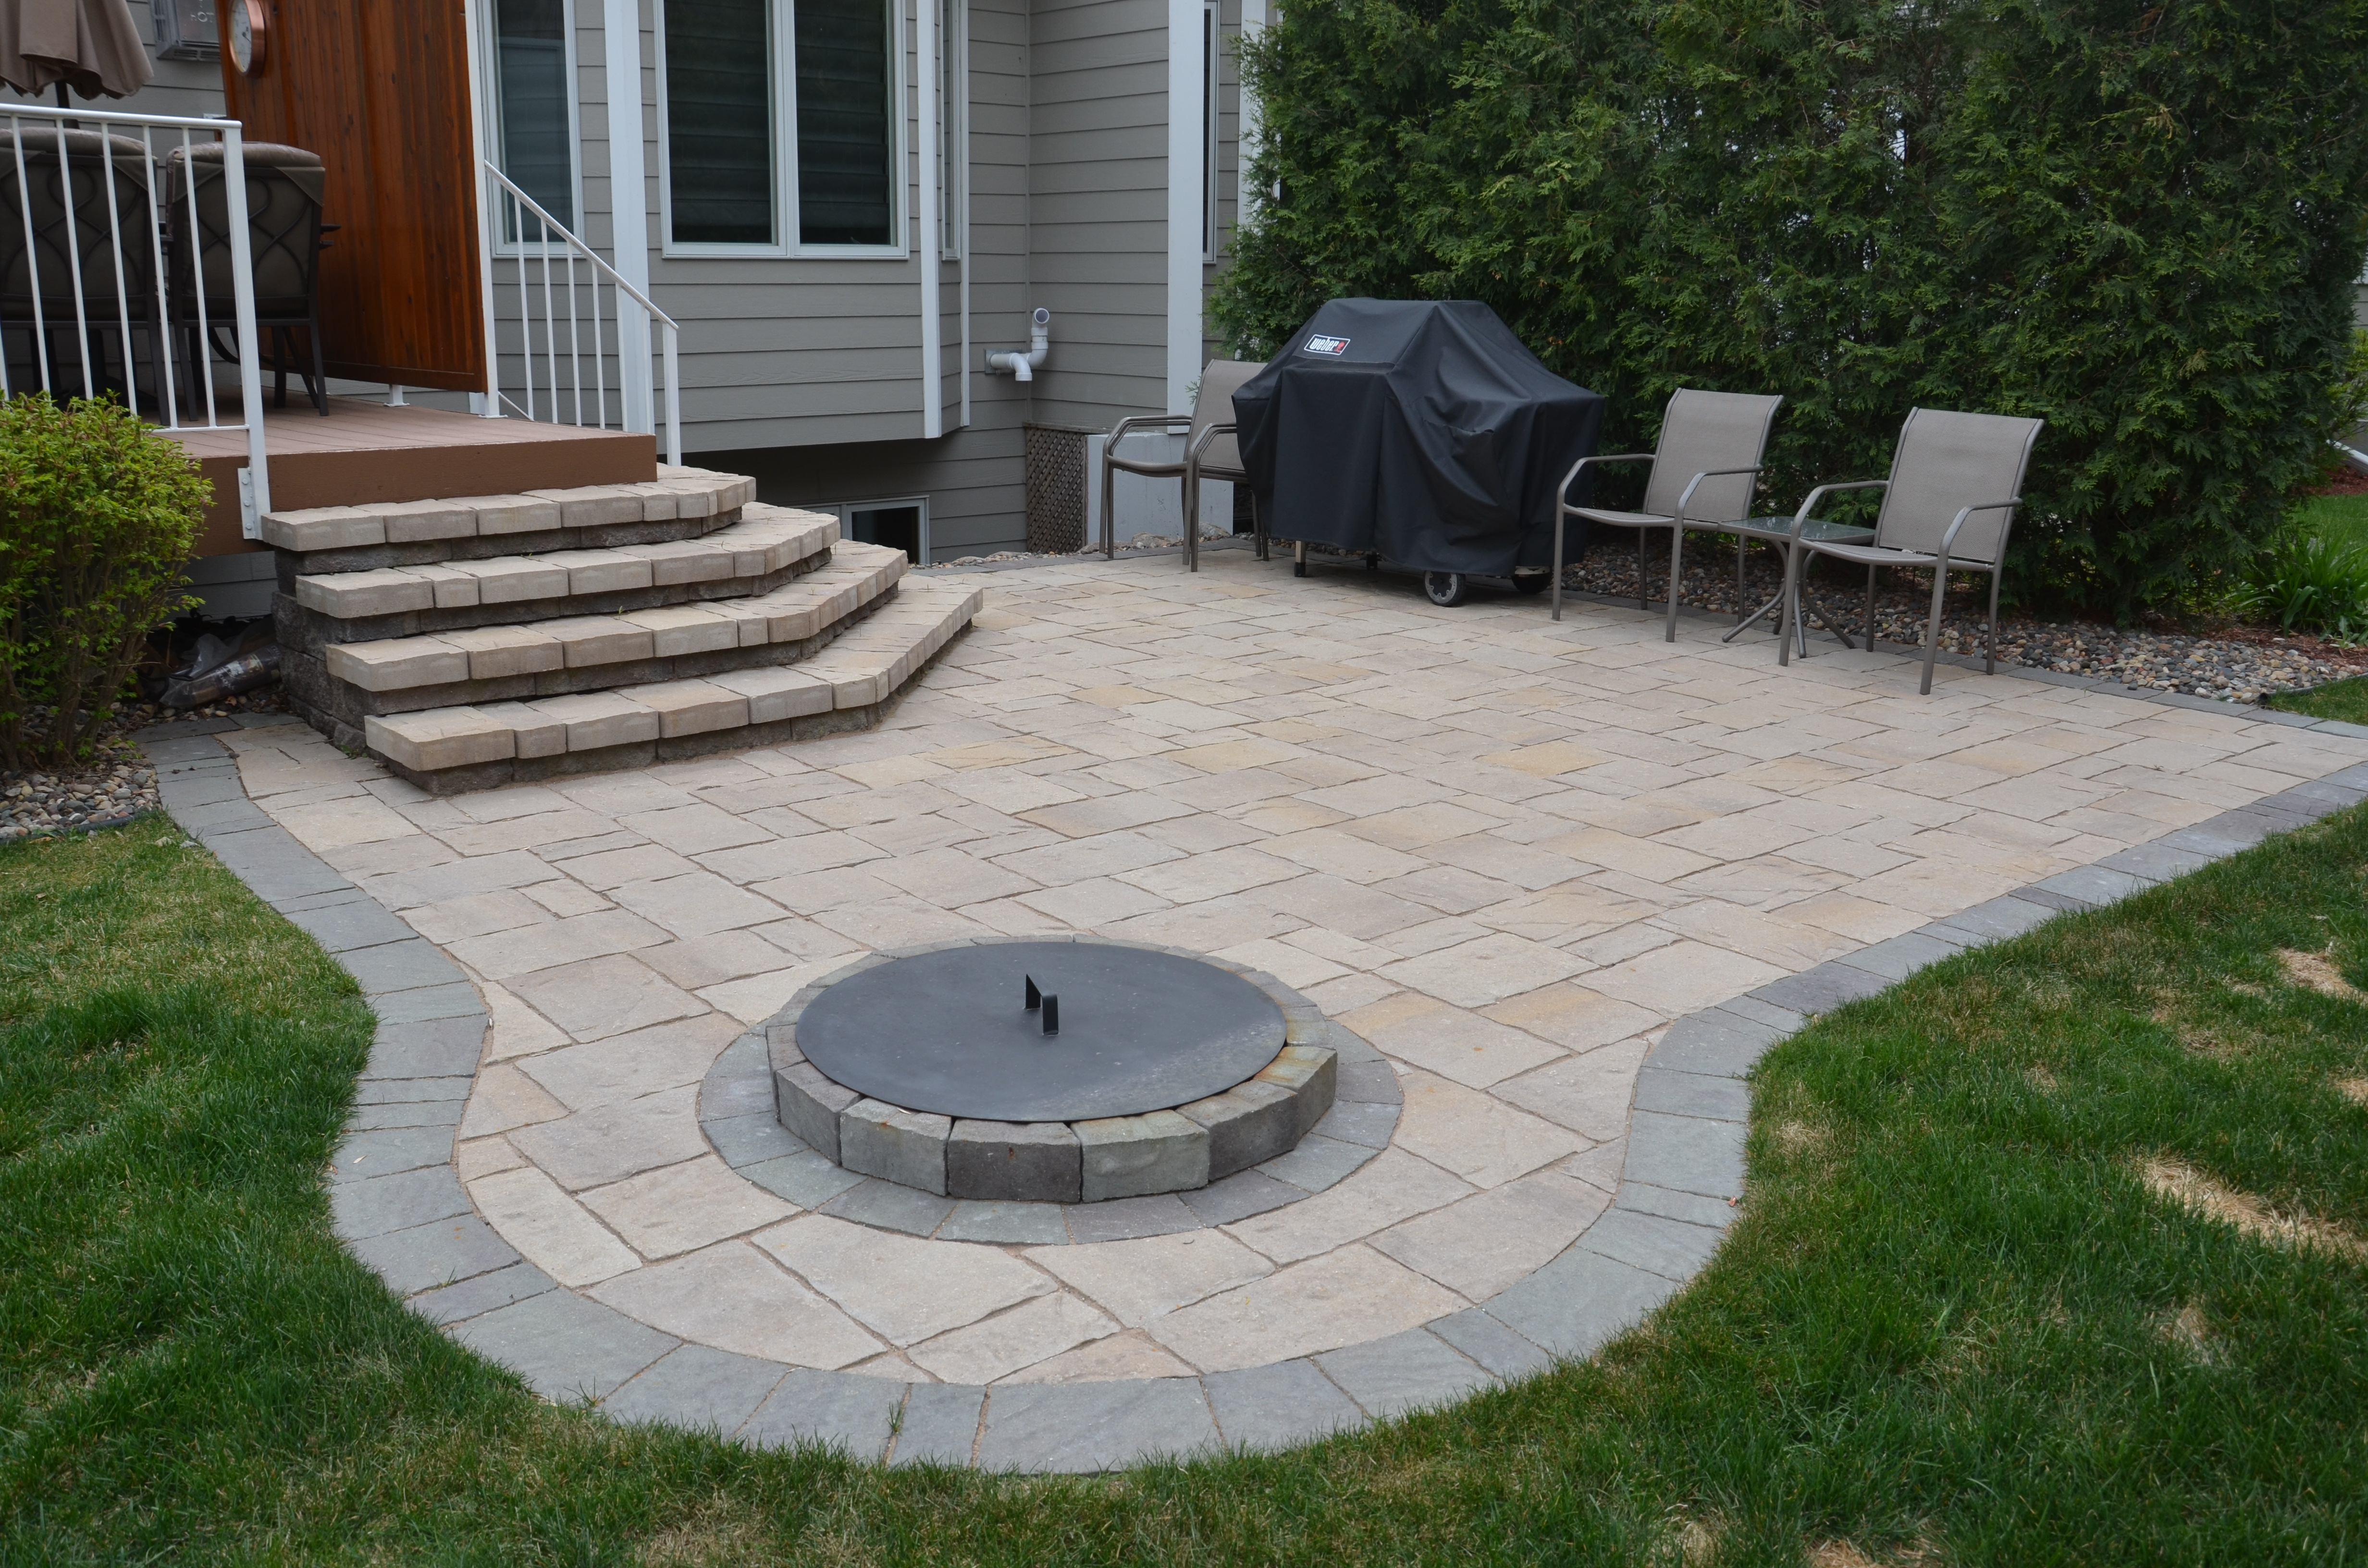 Paver Fire Pit Patio Design And Ideas, How Big To Make Fire Pit Patio With Pavers